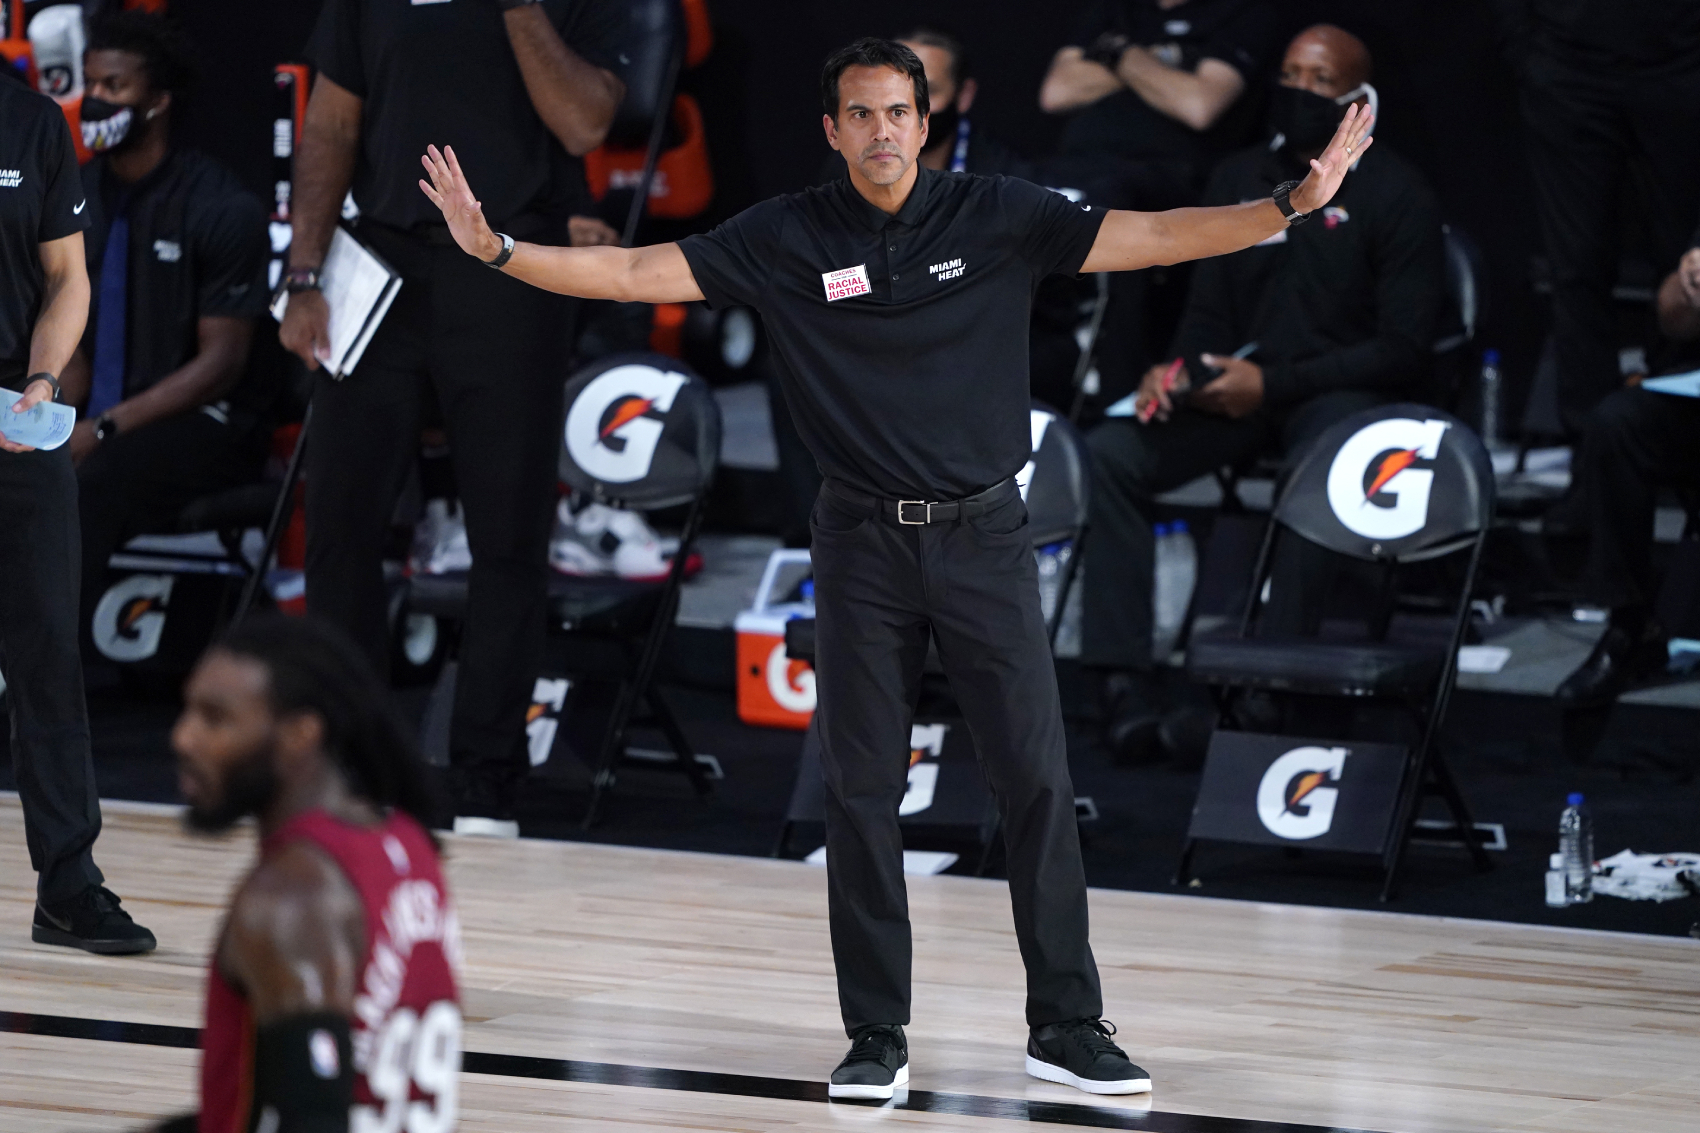 The Miami Heat are down 2-0 to the Lakers in the Finals. Head coach Erik Spoelstra, however, just revealed what they need to do to come back.